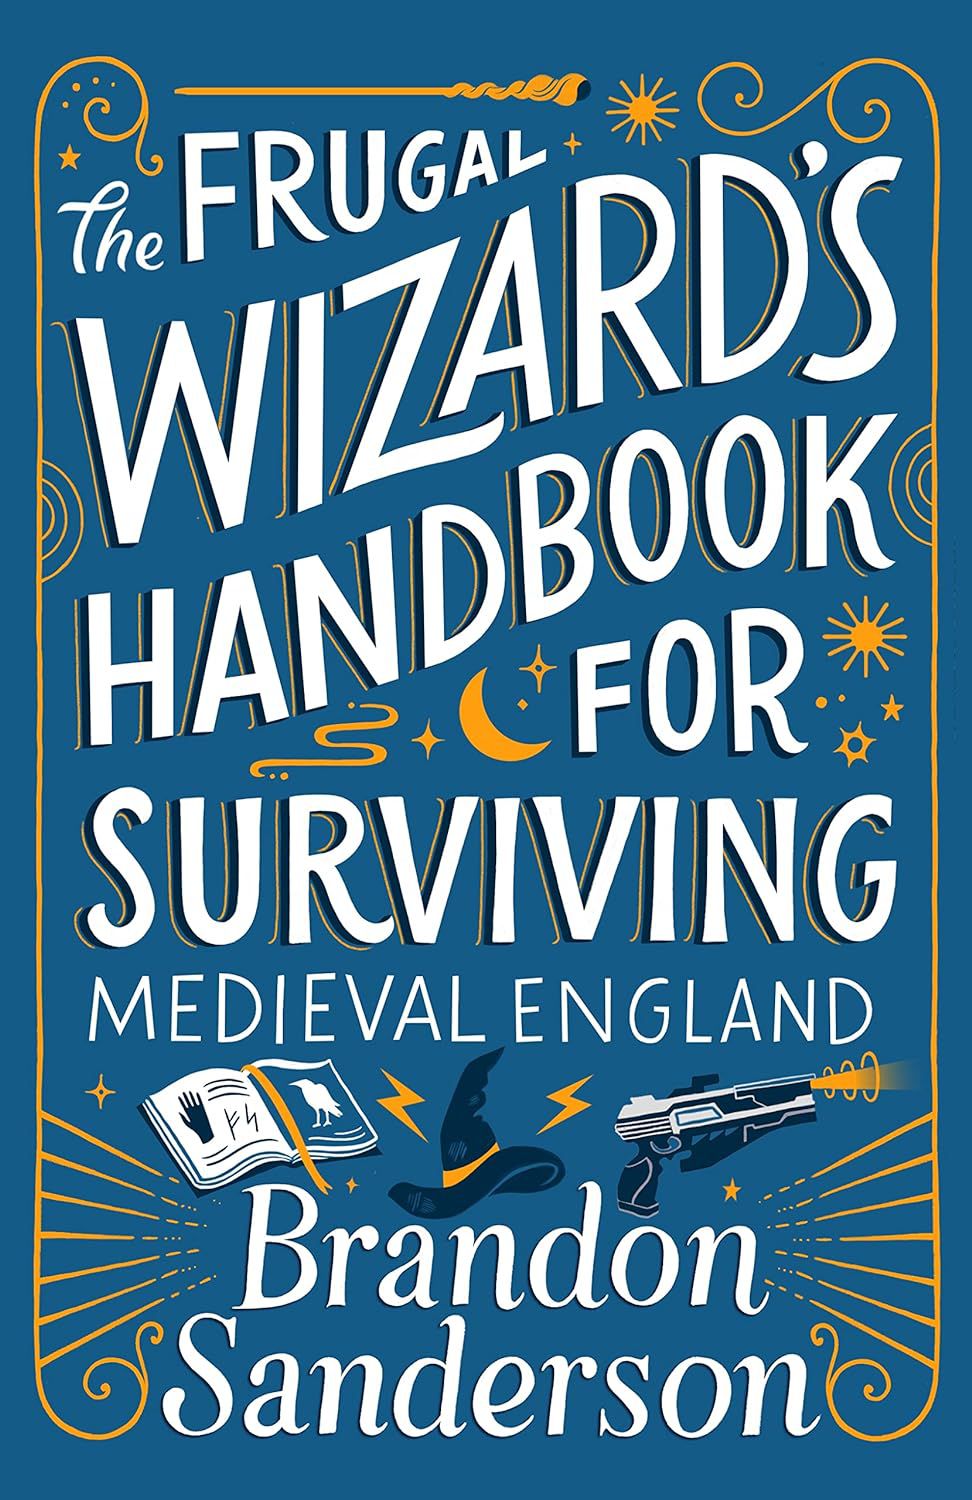 The book cover for The Frugal Wizard’s Handbook for Surviving Medieval England shows an illustrated book, a hat, and a futuristic gun.